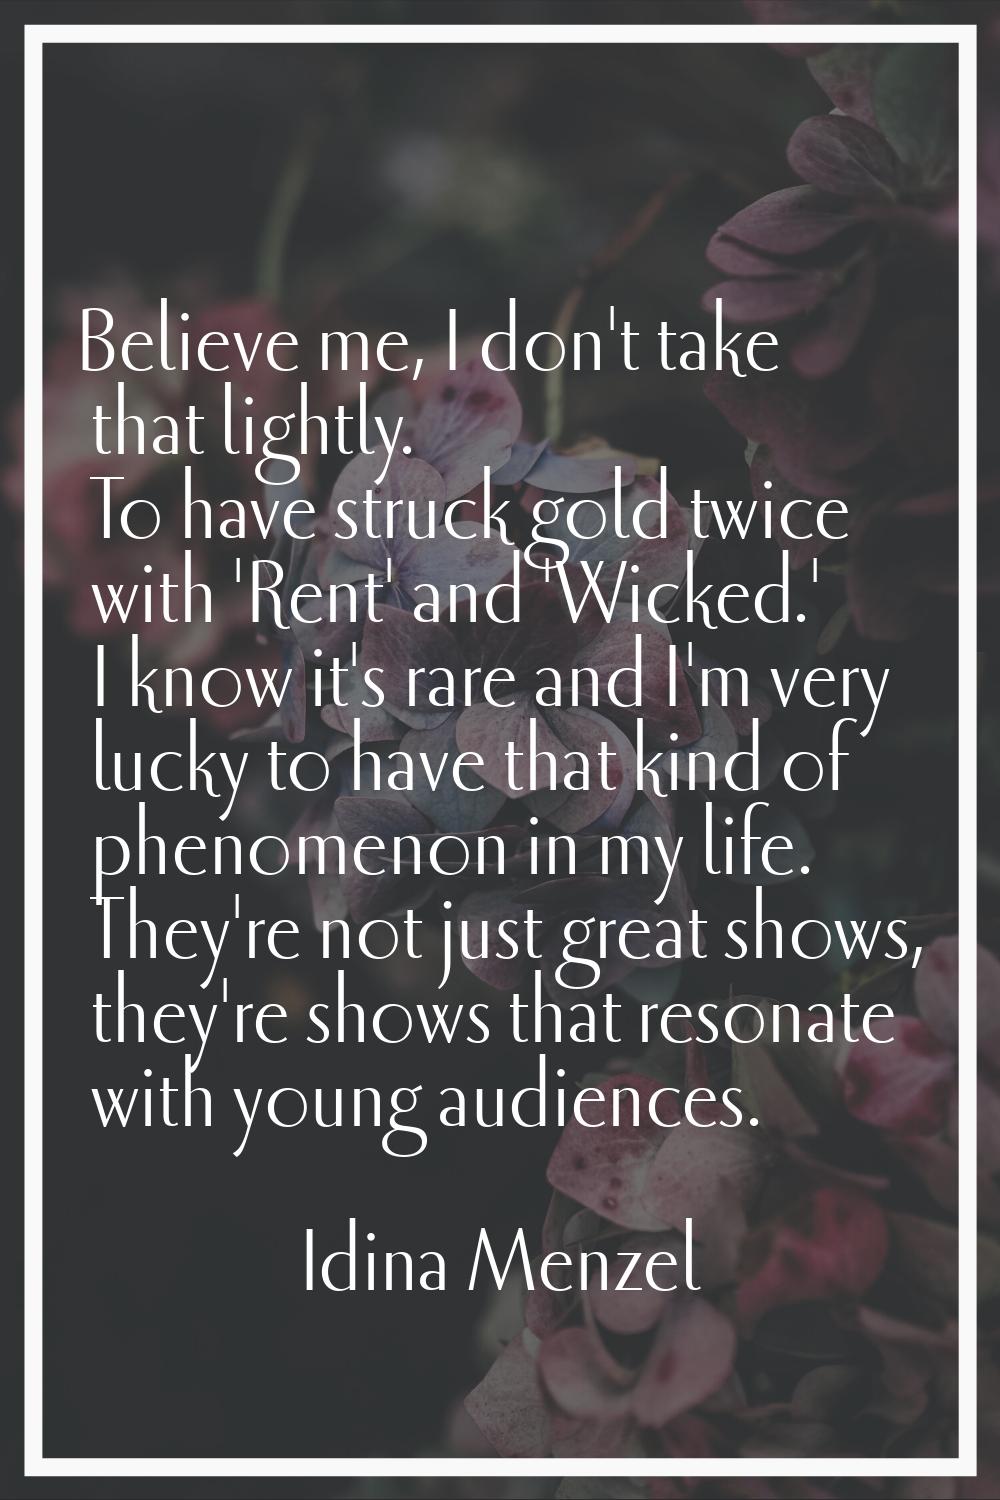 Believe me, I don't take that lightly. To have struck gold twice with 'Rent' and 'Wicked.' I know i